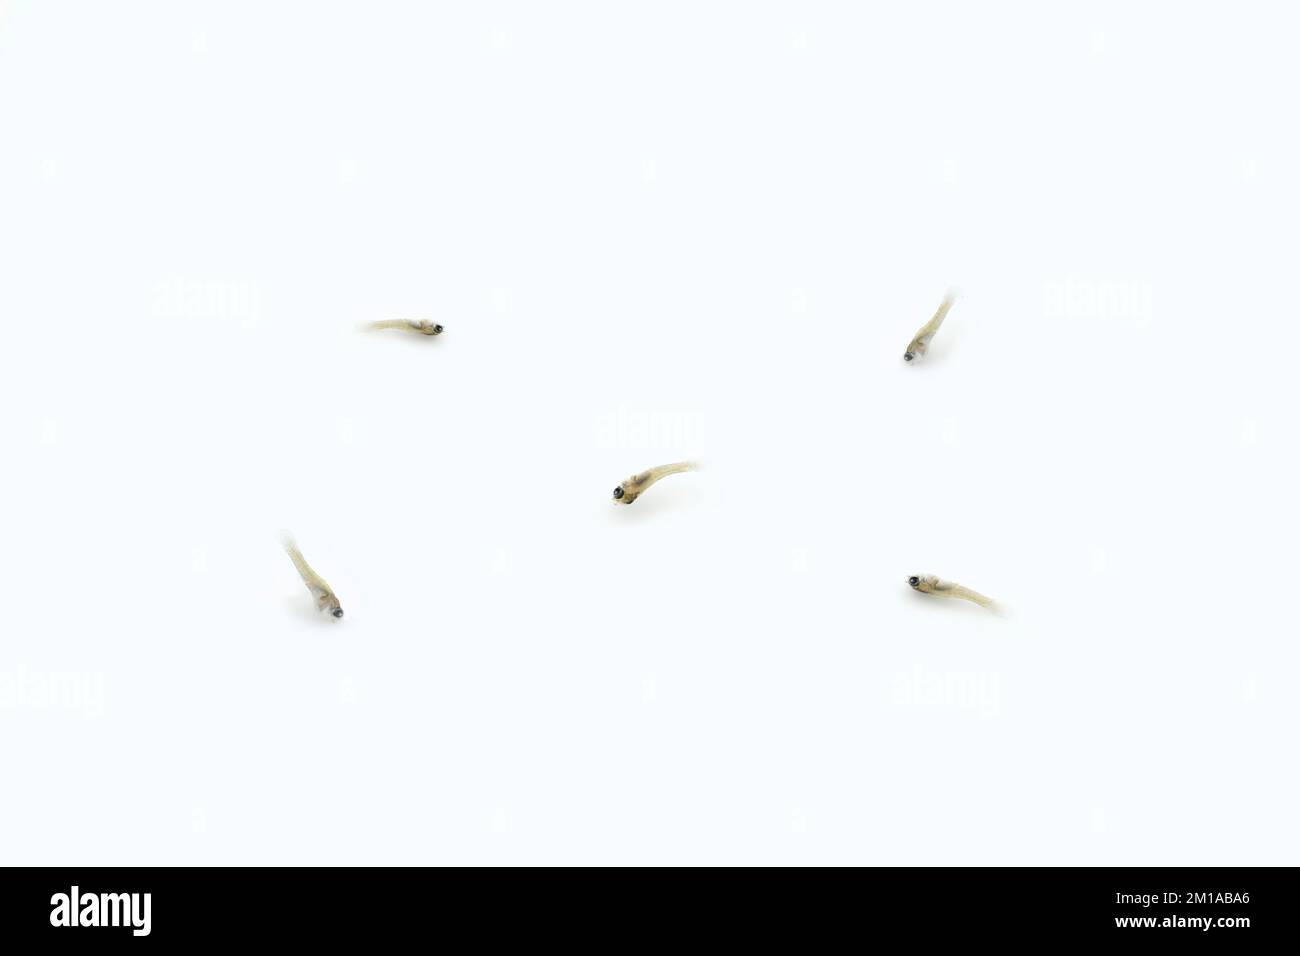 Five dead aquarium fish fries or baby fishes. Isolated on white. Stock Photo